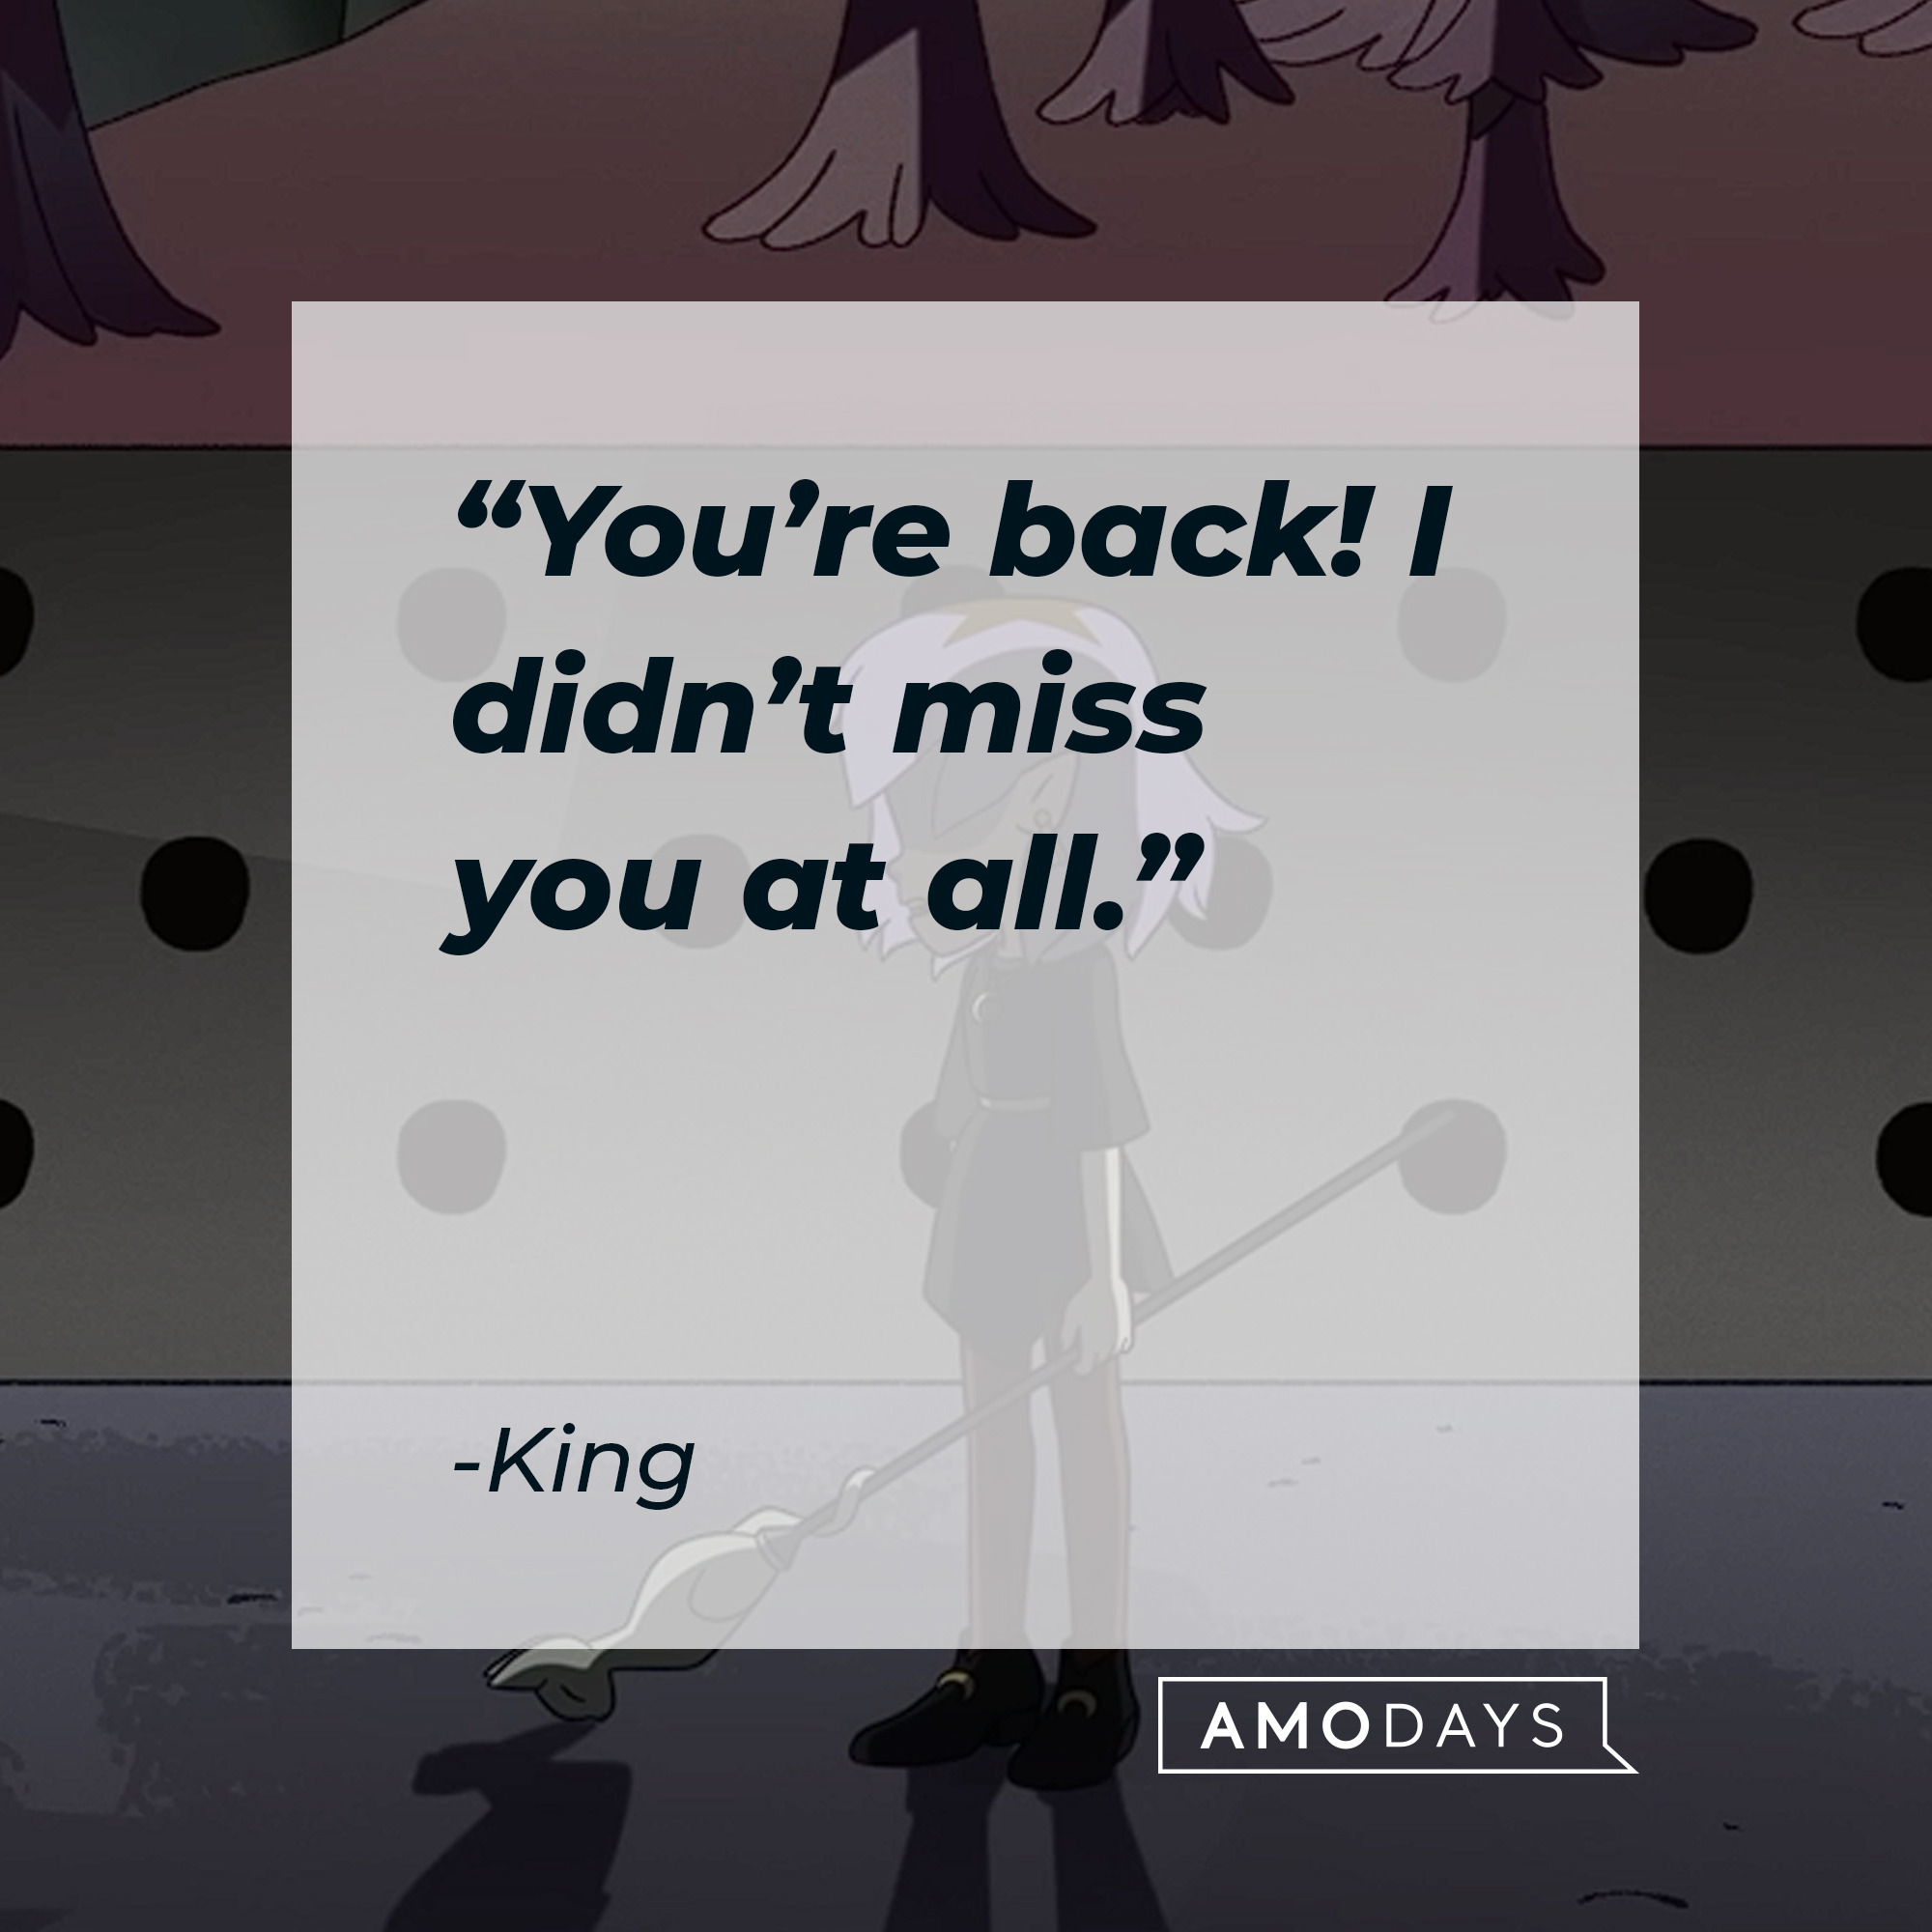 King's quote: “You’re back! I didn’t miss you at all.” | Source: youtube.com/disneychannel